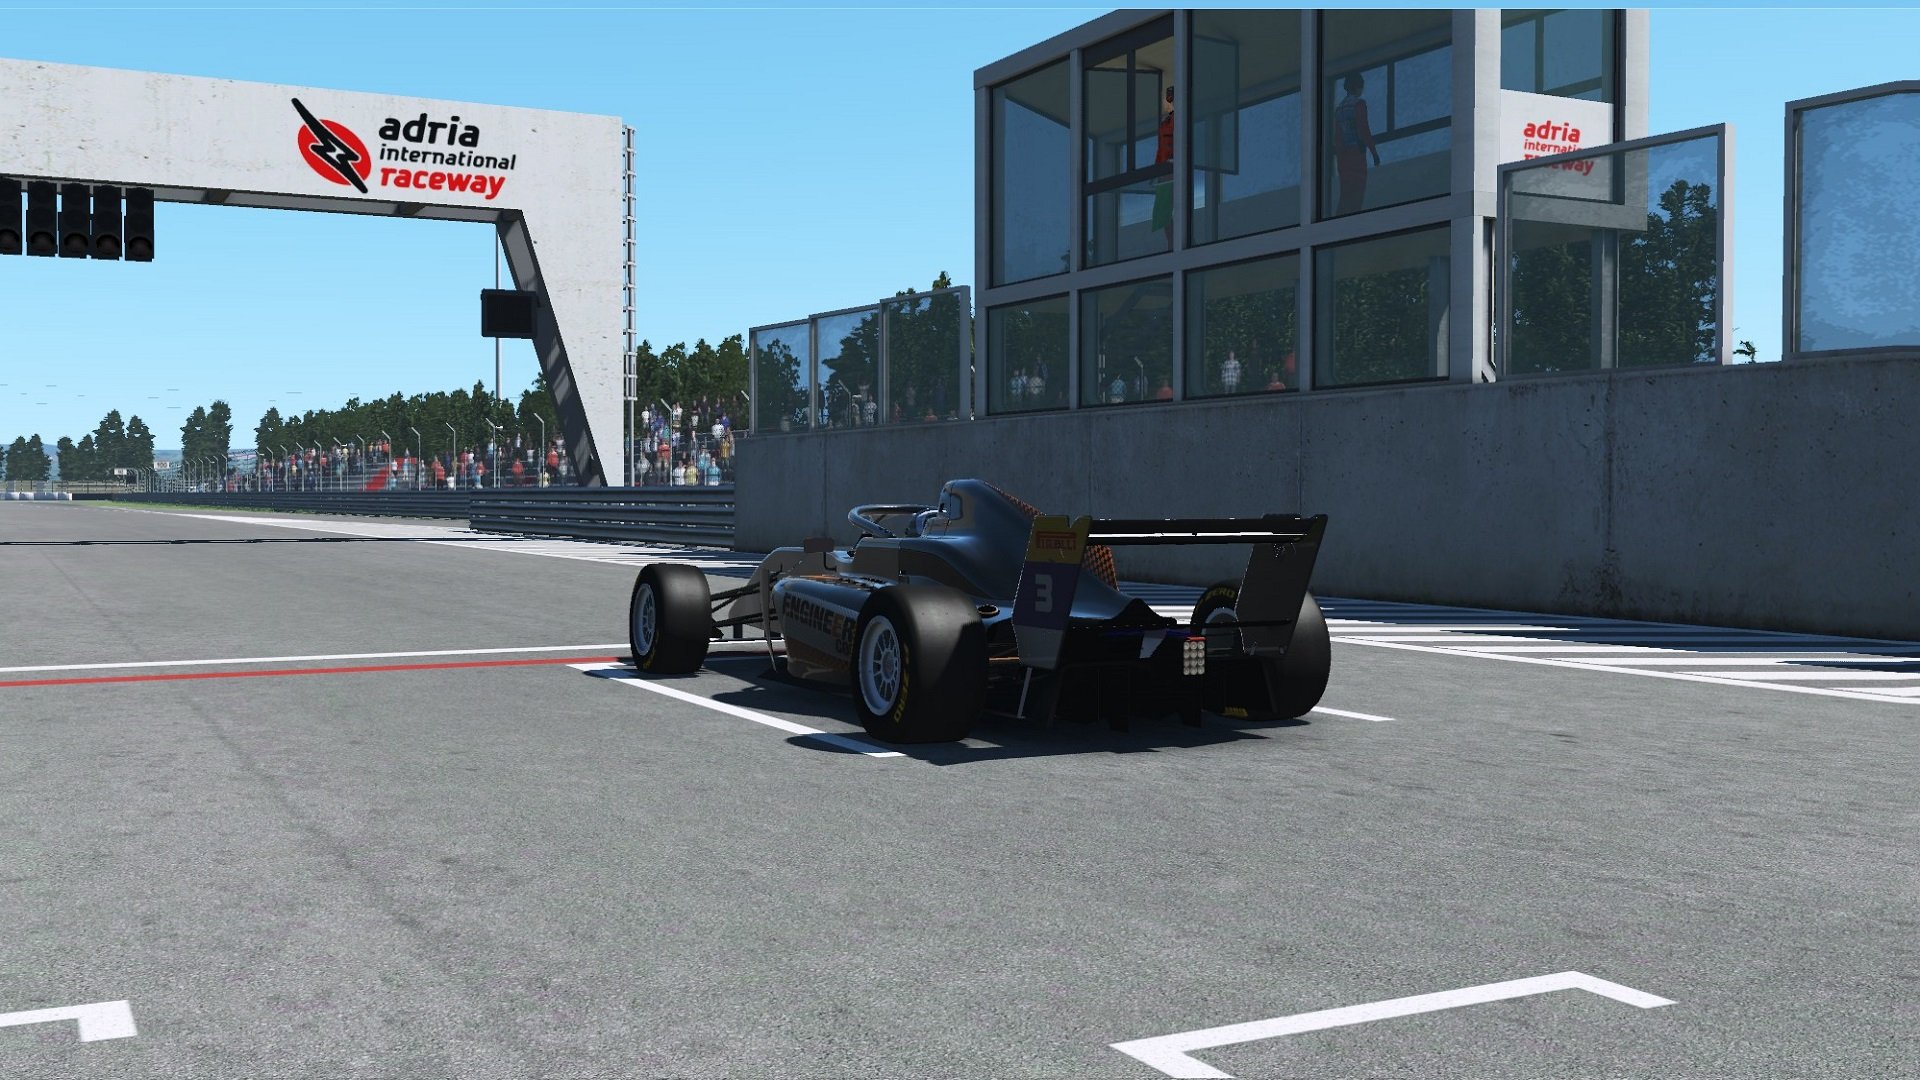 More information about "rFactor 2: 5 nuove piste disponibili, inclusa Adria"